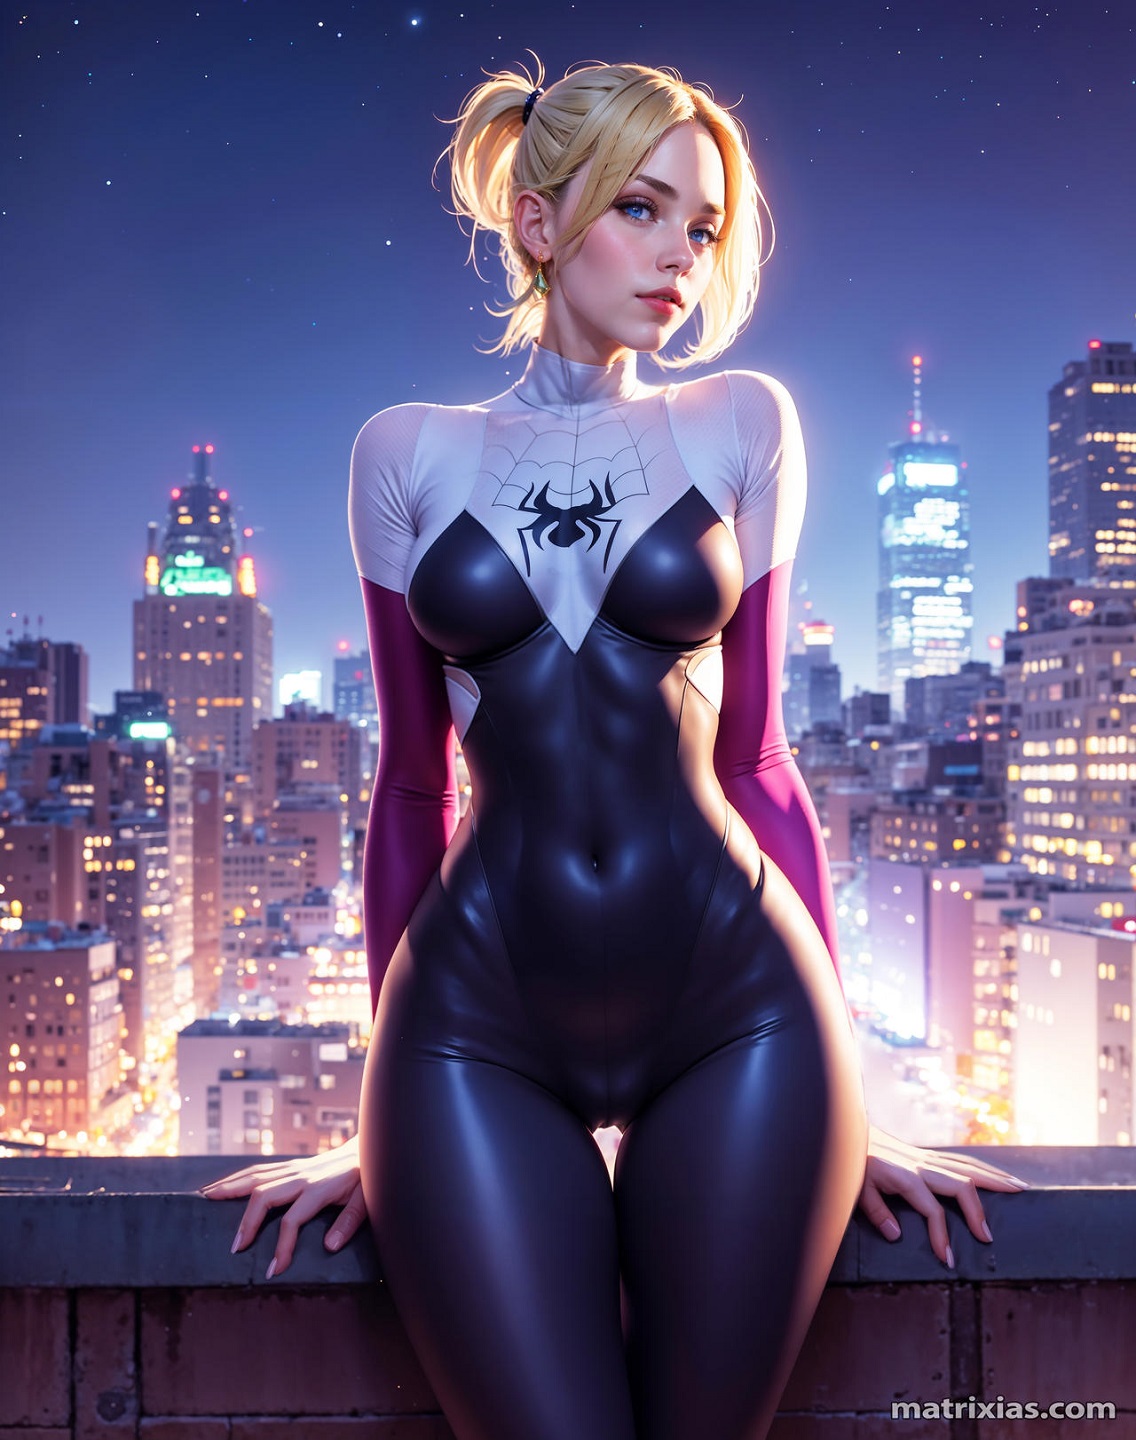 General 1136x1440 Stable Diffusion AI art women Gwen Stacy blonde bodysuit rooftops Marvel Comics Spider Gwen cityscape portrait display digital art night city city lights looking at viewer short hair the gap parted lips building watermarked earring Ghost Spider